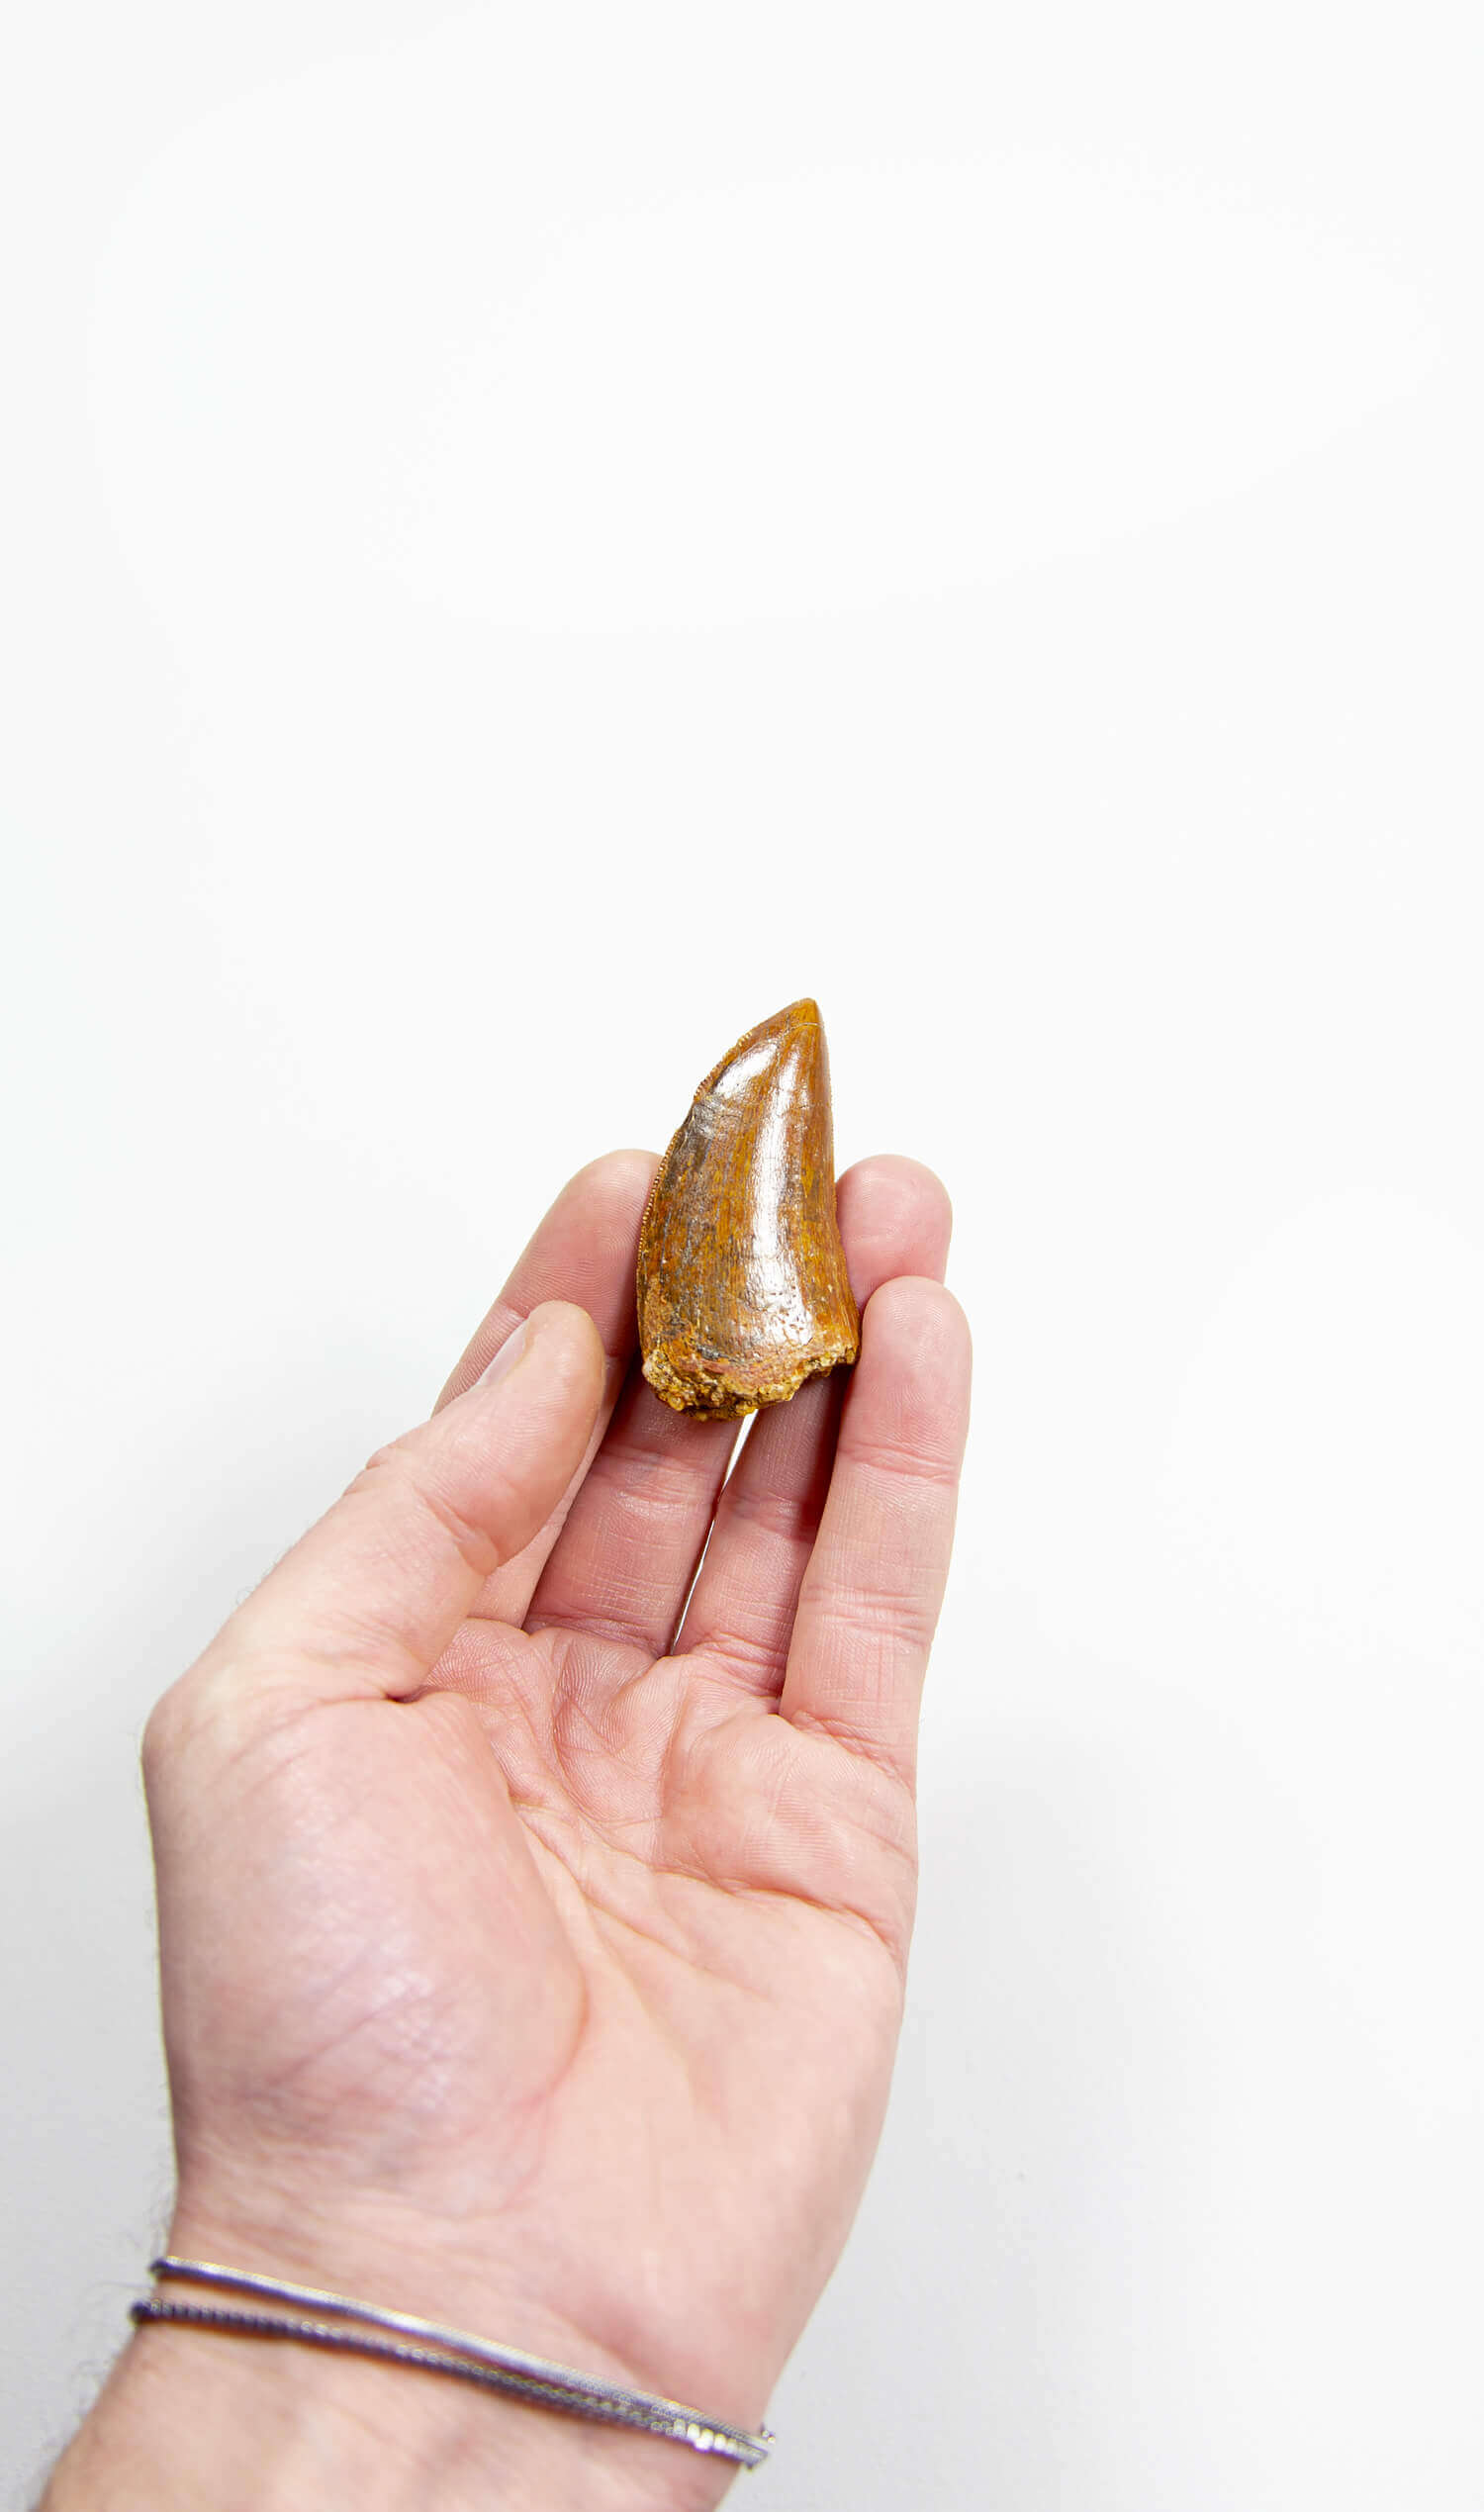 real fossil dinosaur carcharodontosaurus tooth for sale at the uk fossil store 32